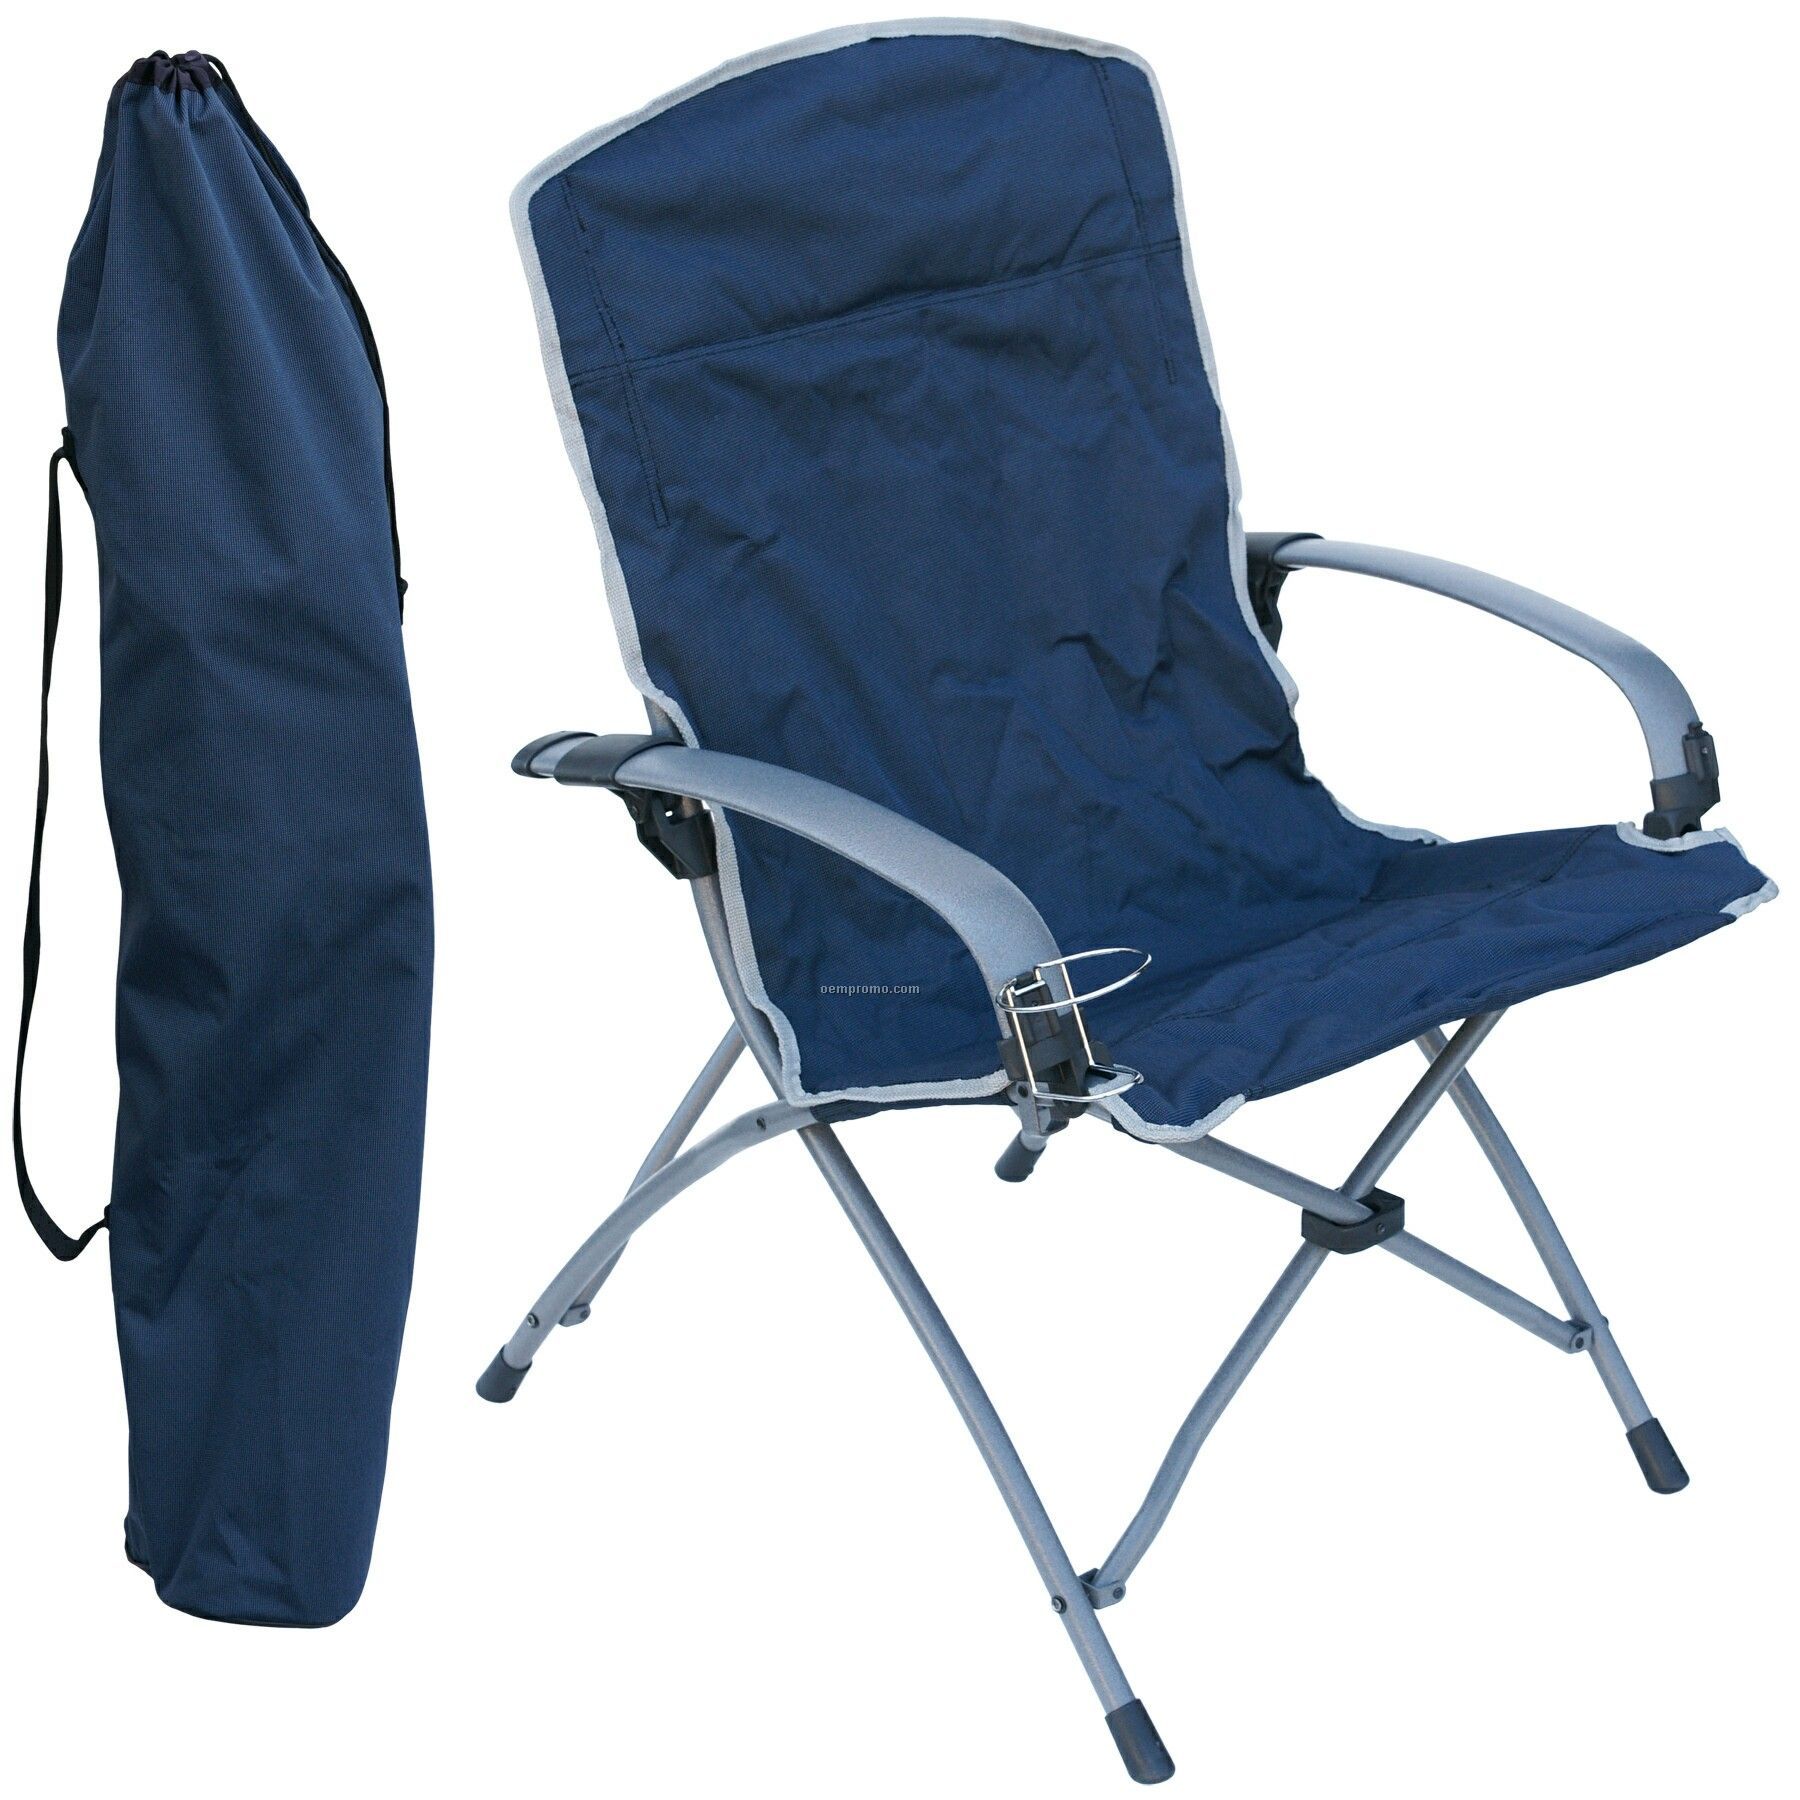 Direct Import Deluxe Collapsible Arm Chair With Removable Cup Holder.